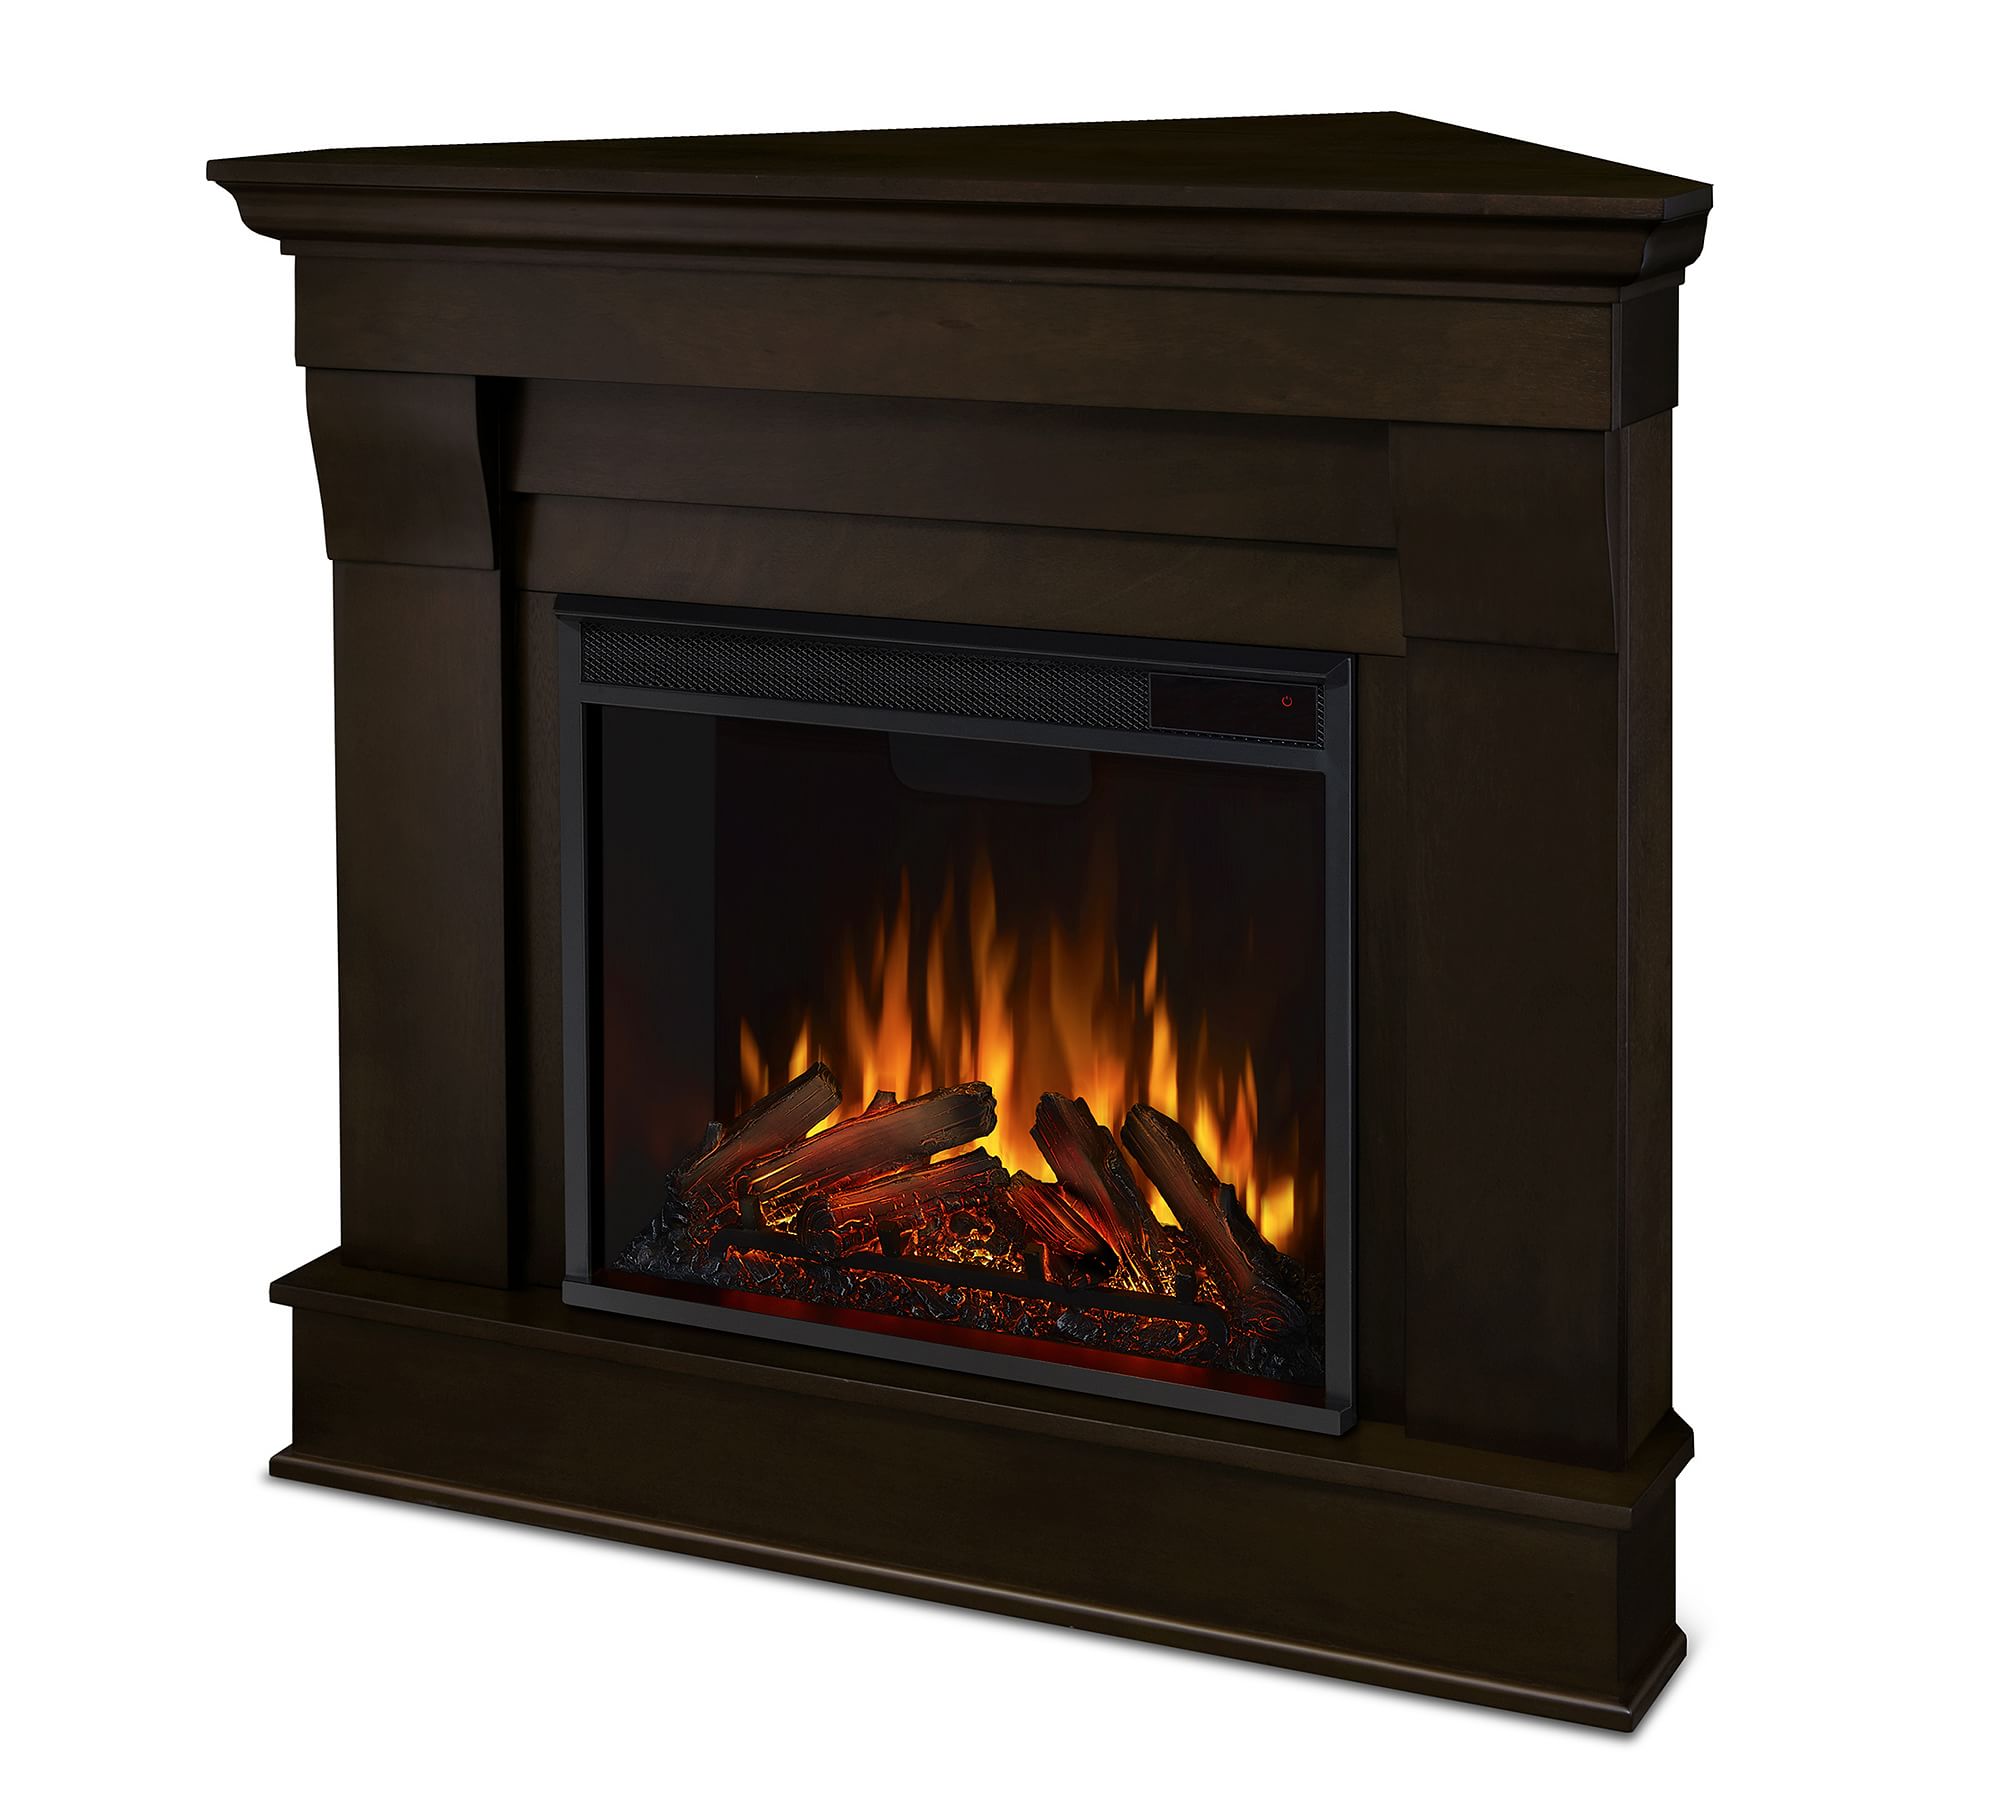 Real Flame® Chateau Corner Electric Fireplace